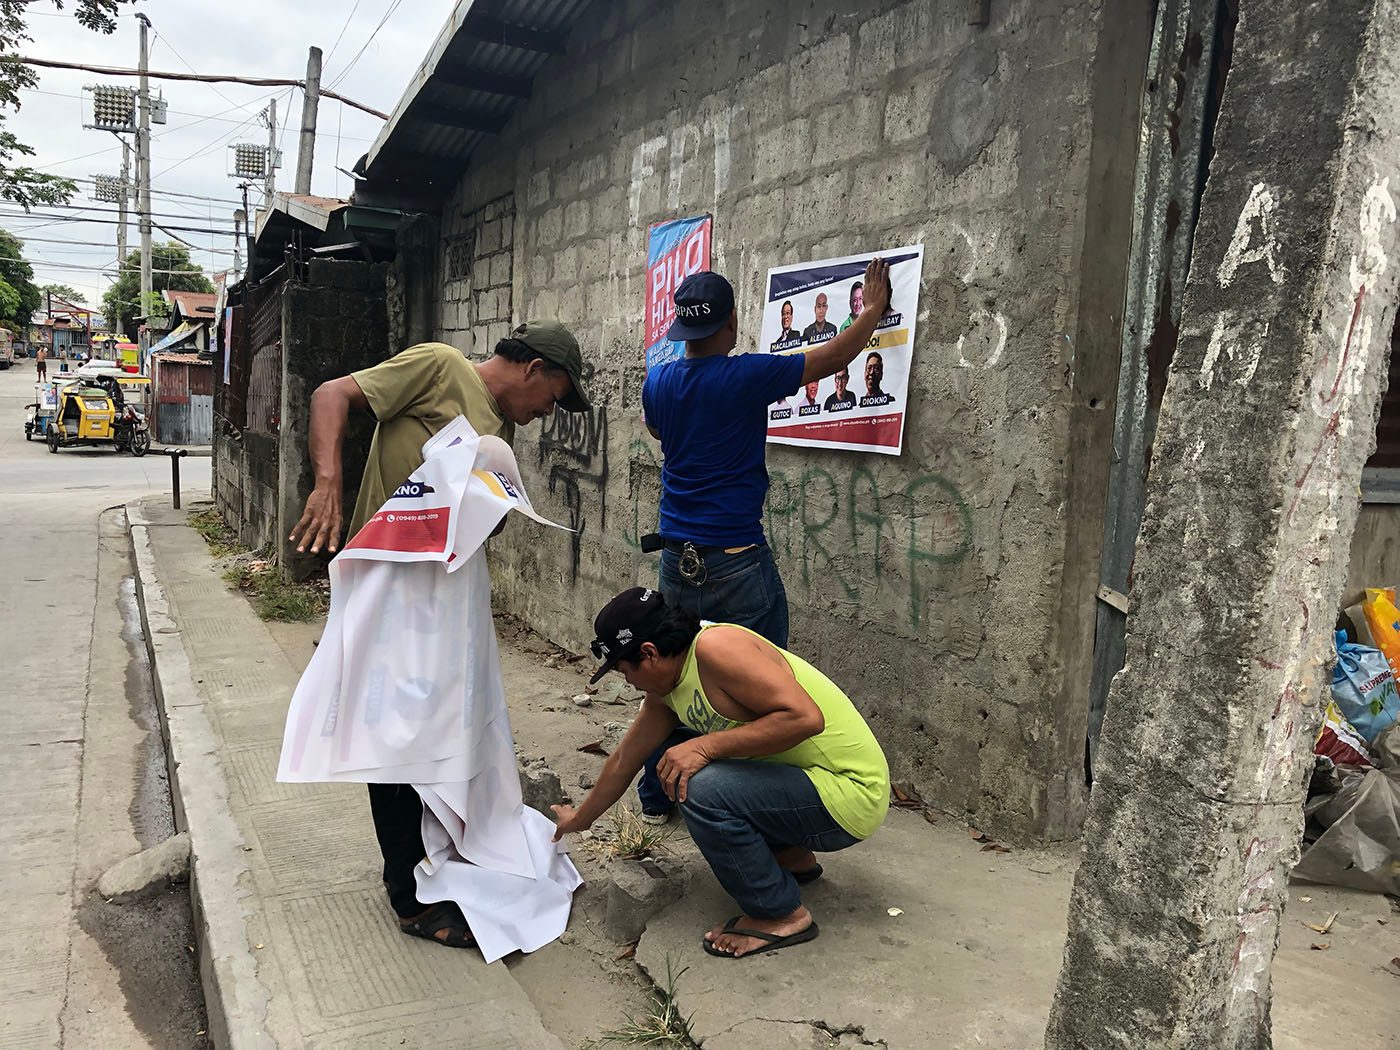 THE VOLUNTEERS. Otso Diretso campaign volunteers put up campaign posters of Otso Diretso just before the candidates arrive for their dialogue with residents of Southville 3, Muntinlupa on March 5, 2019. Photo by Mara Cepeda/Rappler  